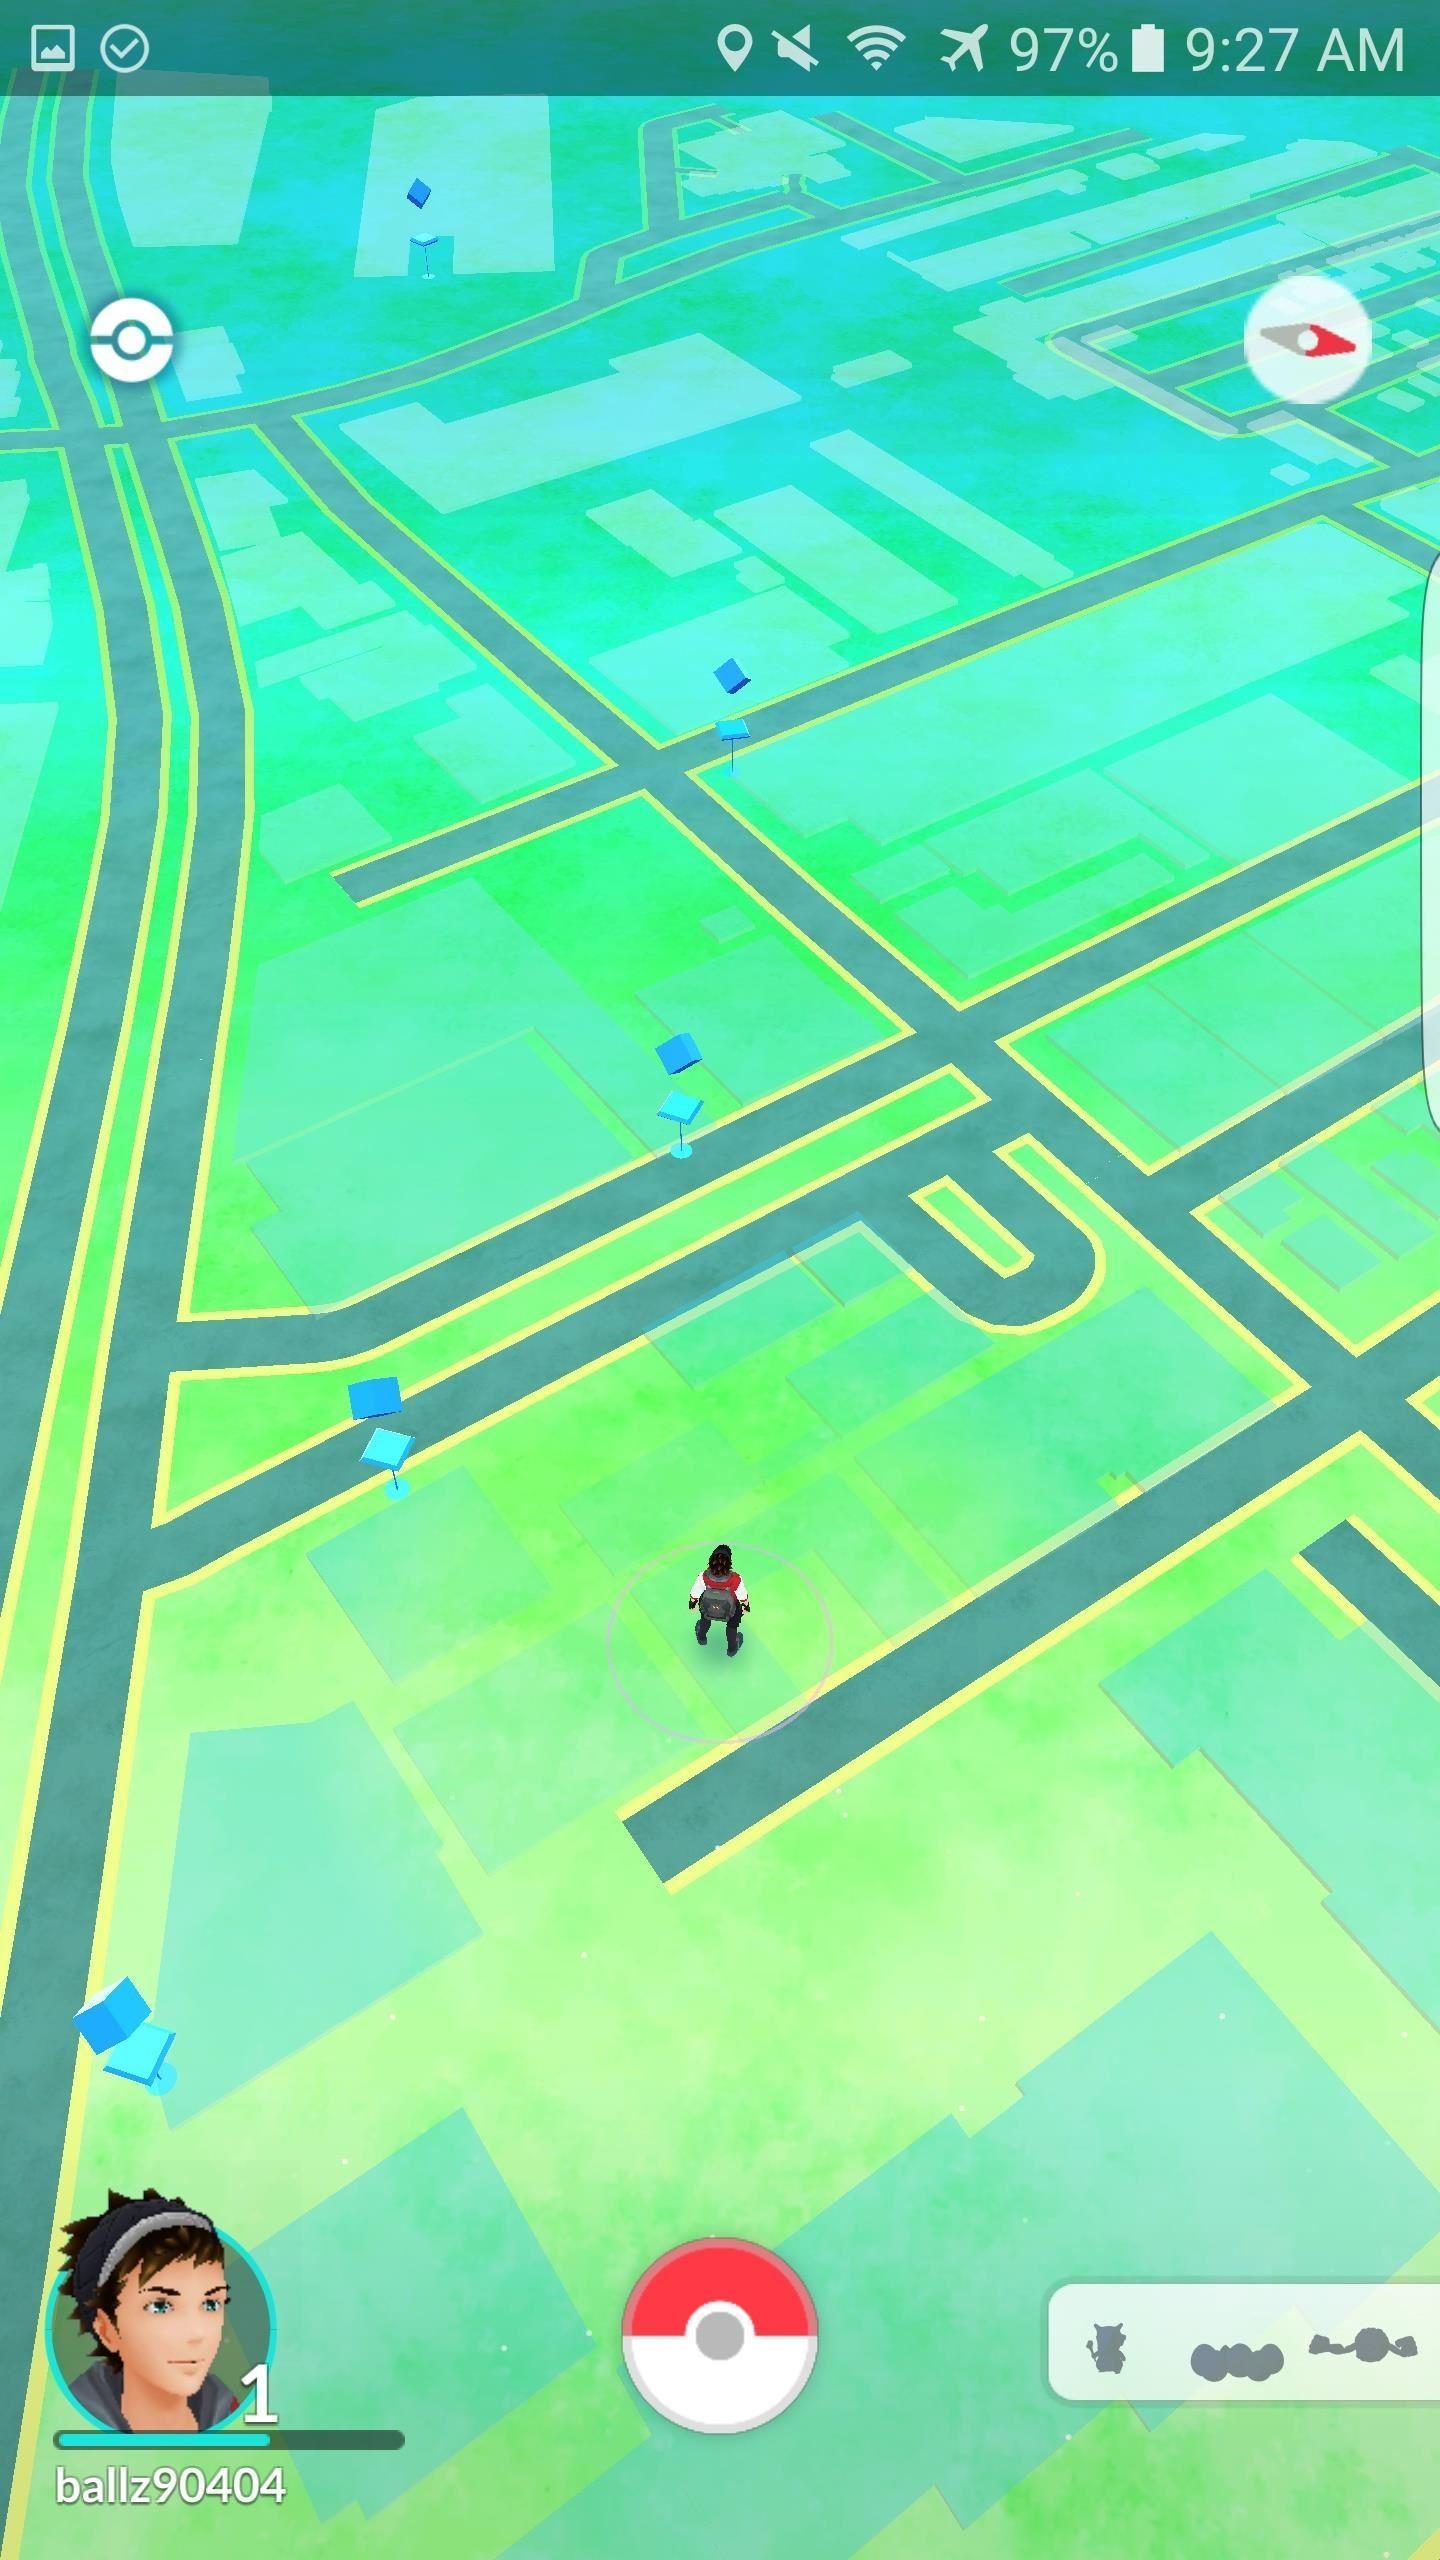 Guide Pokemon GO GPS Spoofer for Android - APK Download